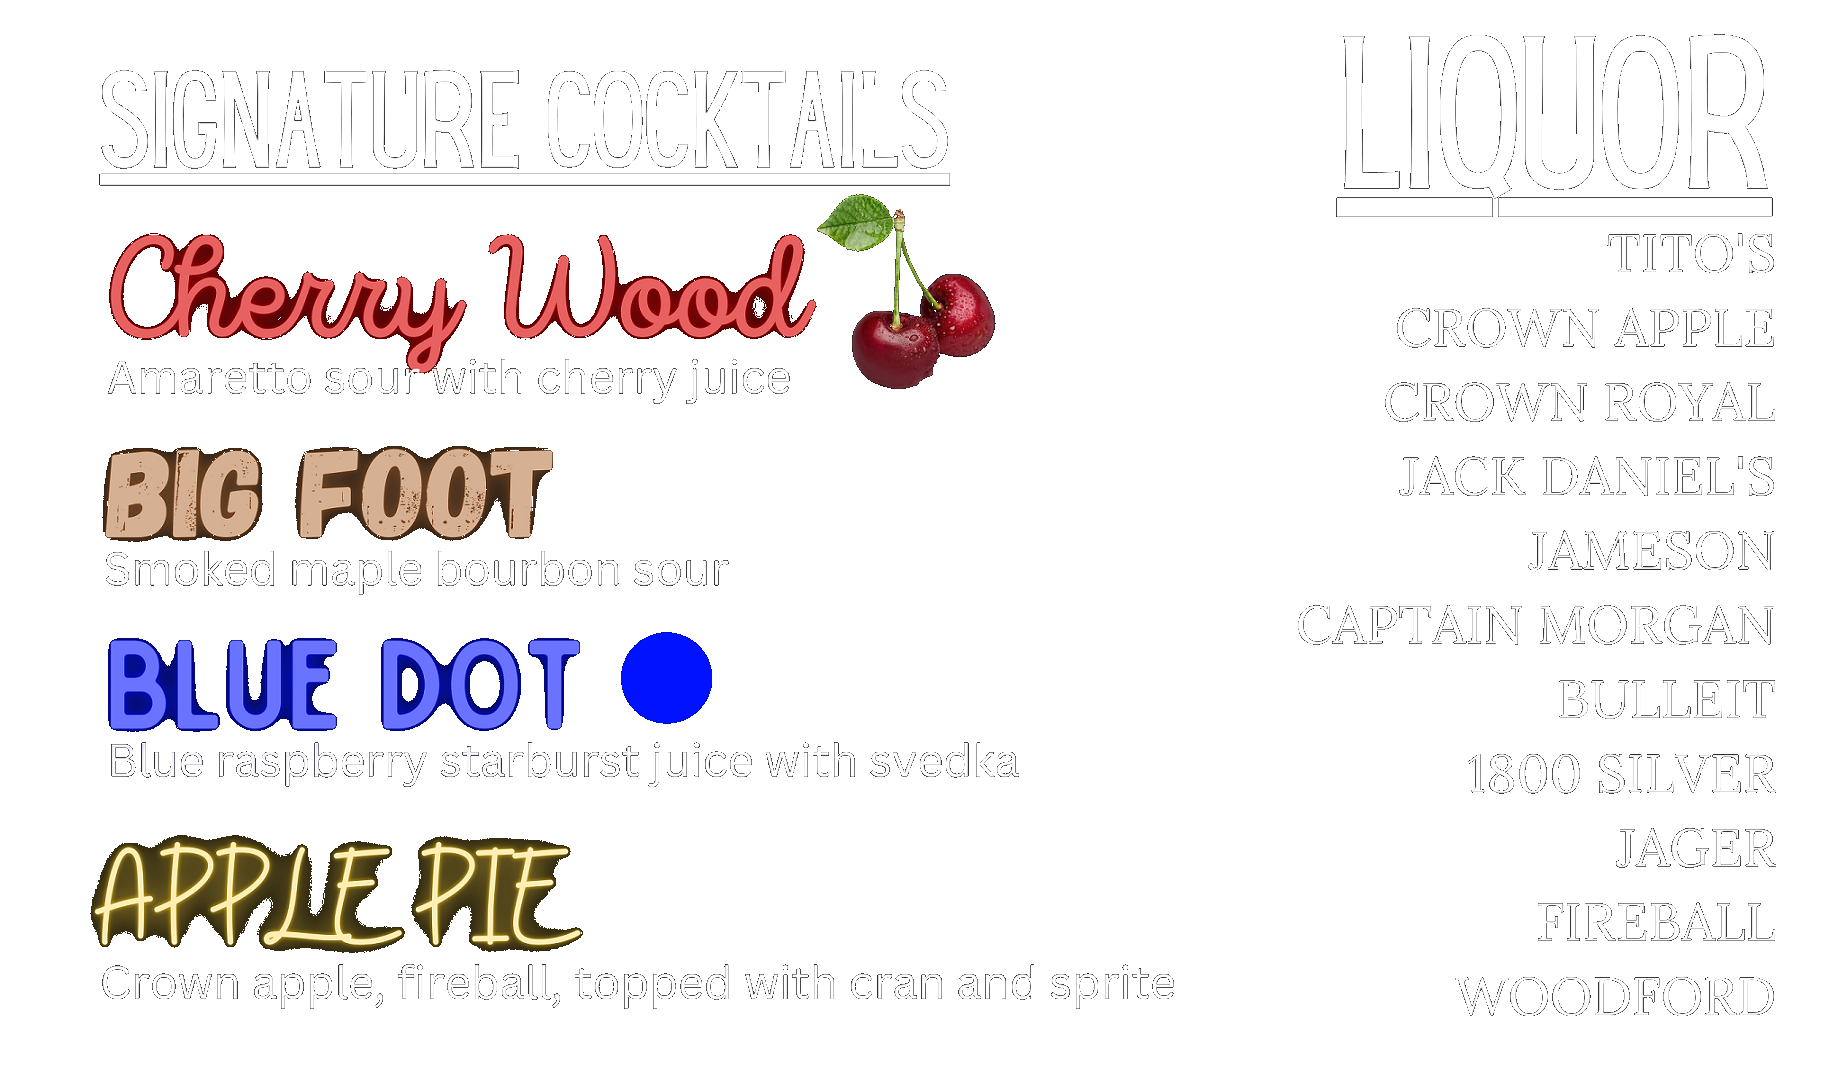 Image one of two containing Level Up's bar menu. Under signature cocktails there's a list containing 4 drinks. Cherry Wood which is Amaretto sour with cherry juice. Big Foot which is smoked maple bourbon sour. Blue Dot which is Blue raspberry starburst juice with svedka. Apple Pie which is crown apple, fireball, topped with cran and sprite. To the right of signature cocktails the the header Liquor containing a full list as follows - Titos, crown apple, Crown Royal, Jack Daniel's, Jameson, Captain Morgan, Bulleit, 1800 Silver, Jager, Fireball, Woodford.